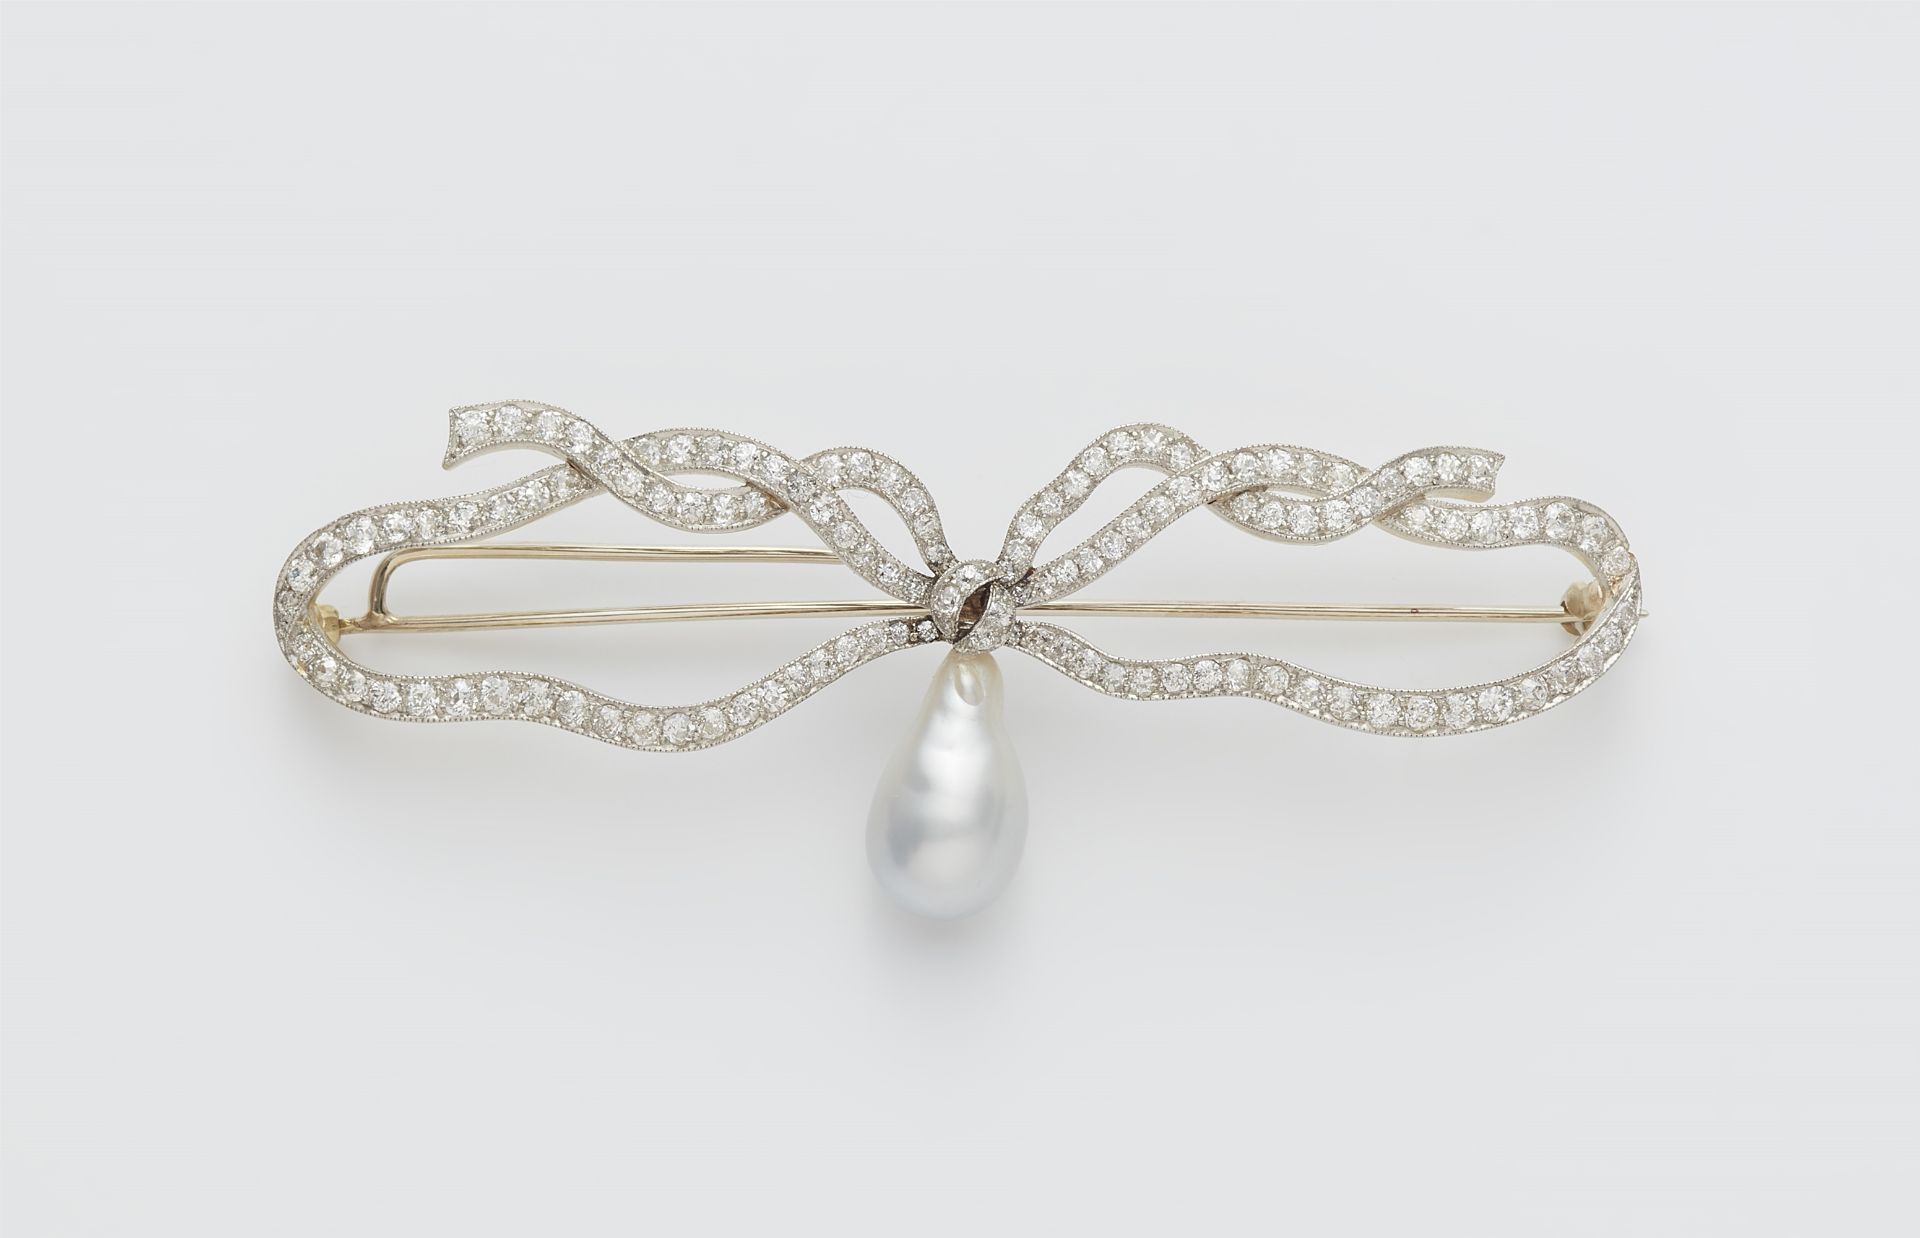 A 14k gold Belle Epoque diamond brooch with a later South Sea pearl droplet.